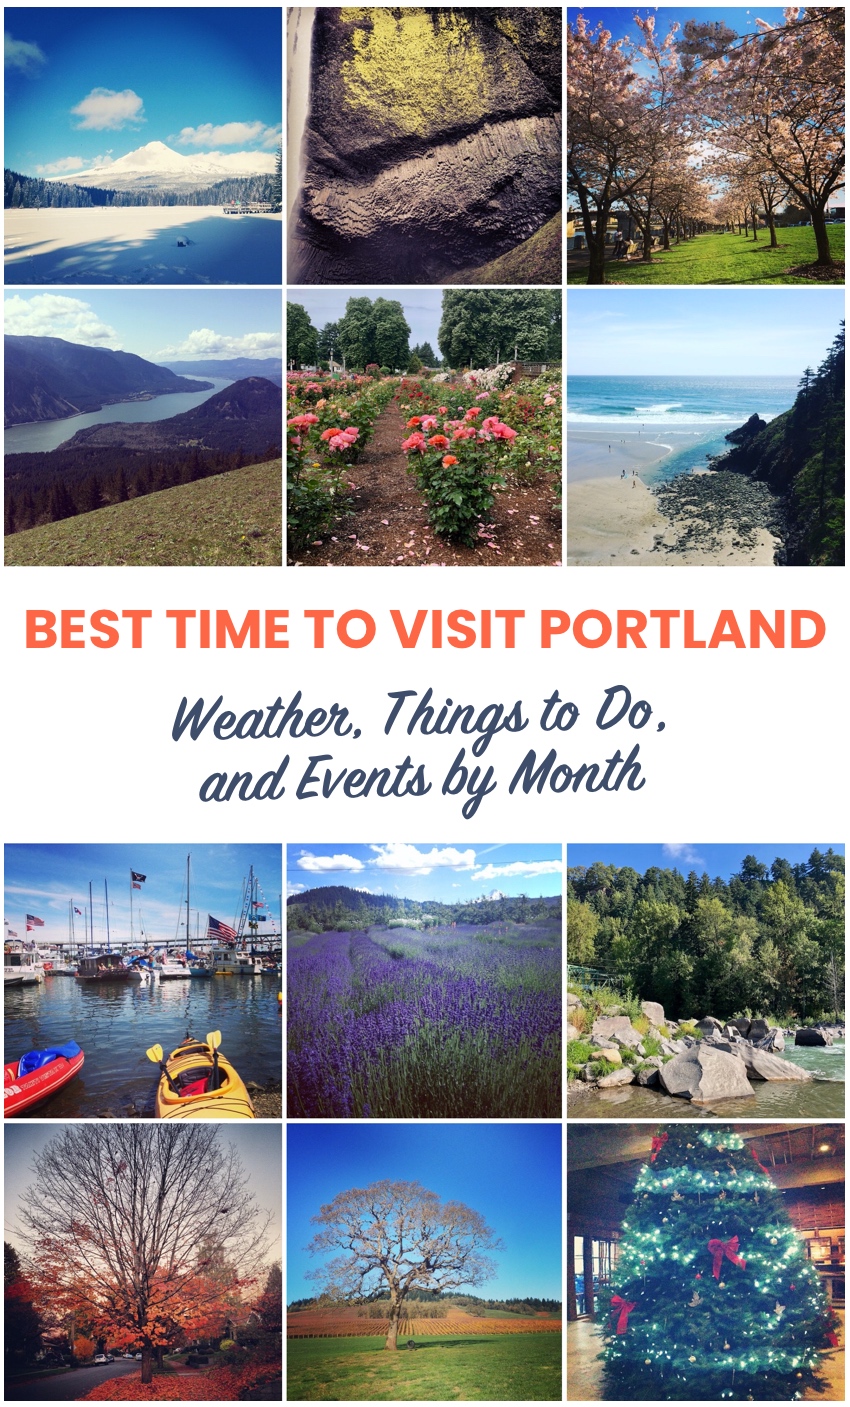 Best Time to visit Portland - by month